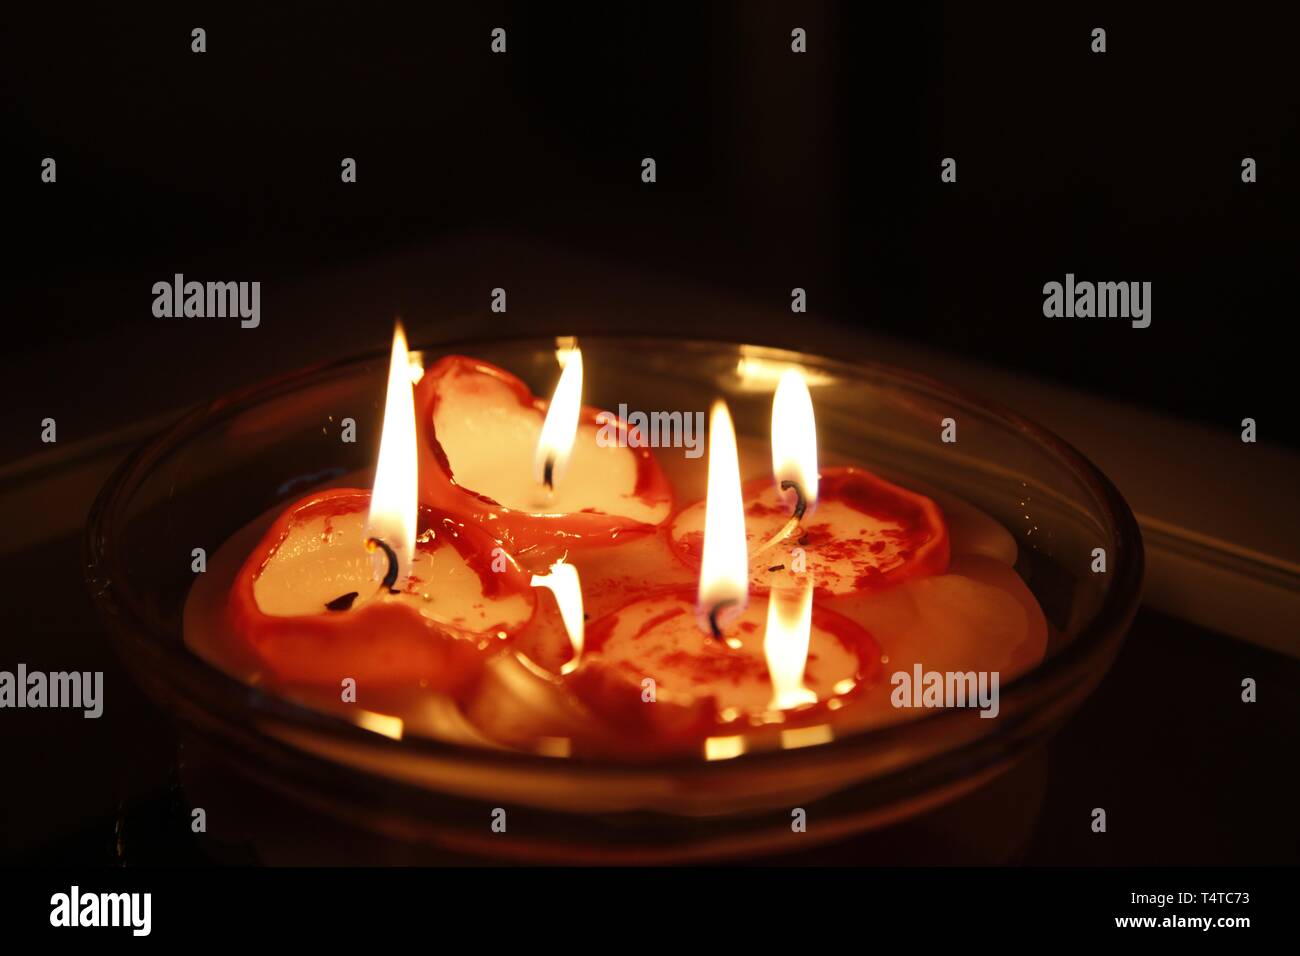 Burning candles in a bowl Stock Photo